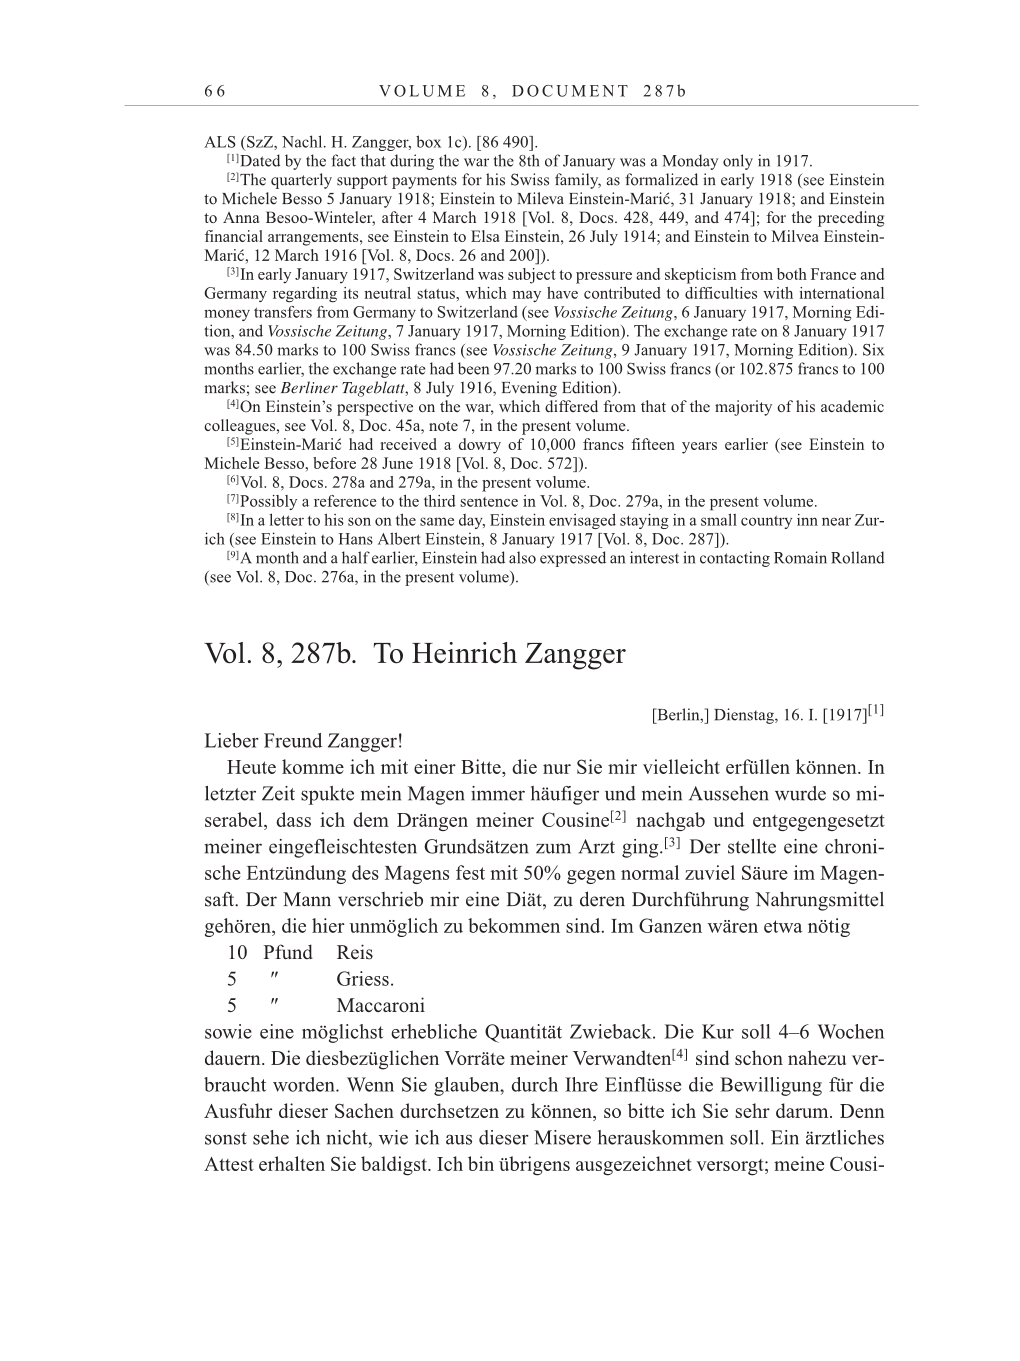 Volume 10: The Berlin Years: Correspondence May-December 1920 / Supplementary Correspondence 1909-1920 page 66